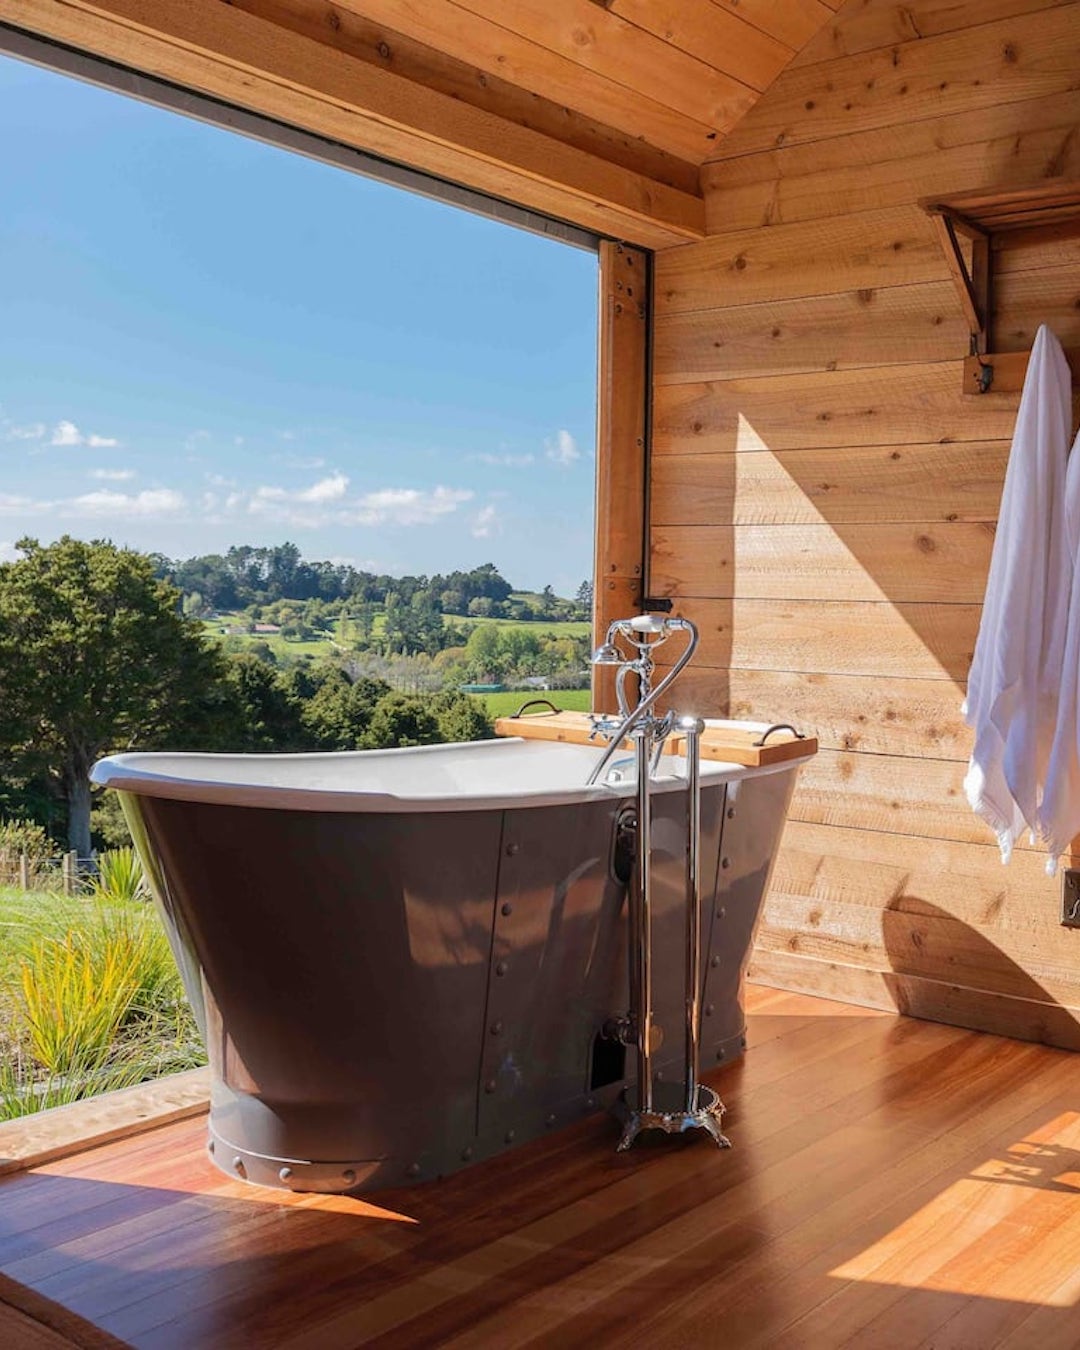 A free-standing bath overlooks green fields, definitely one of the best tiny home airbnbs in NZ.